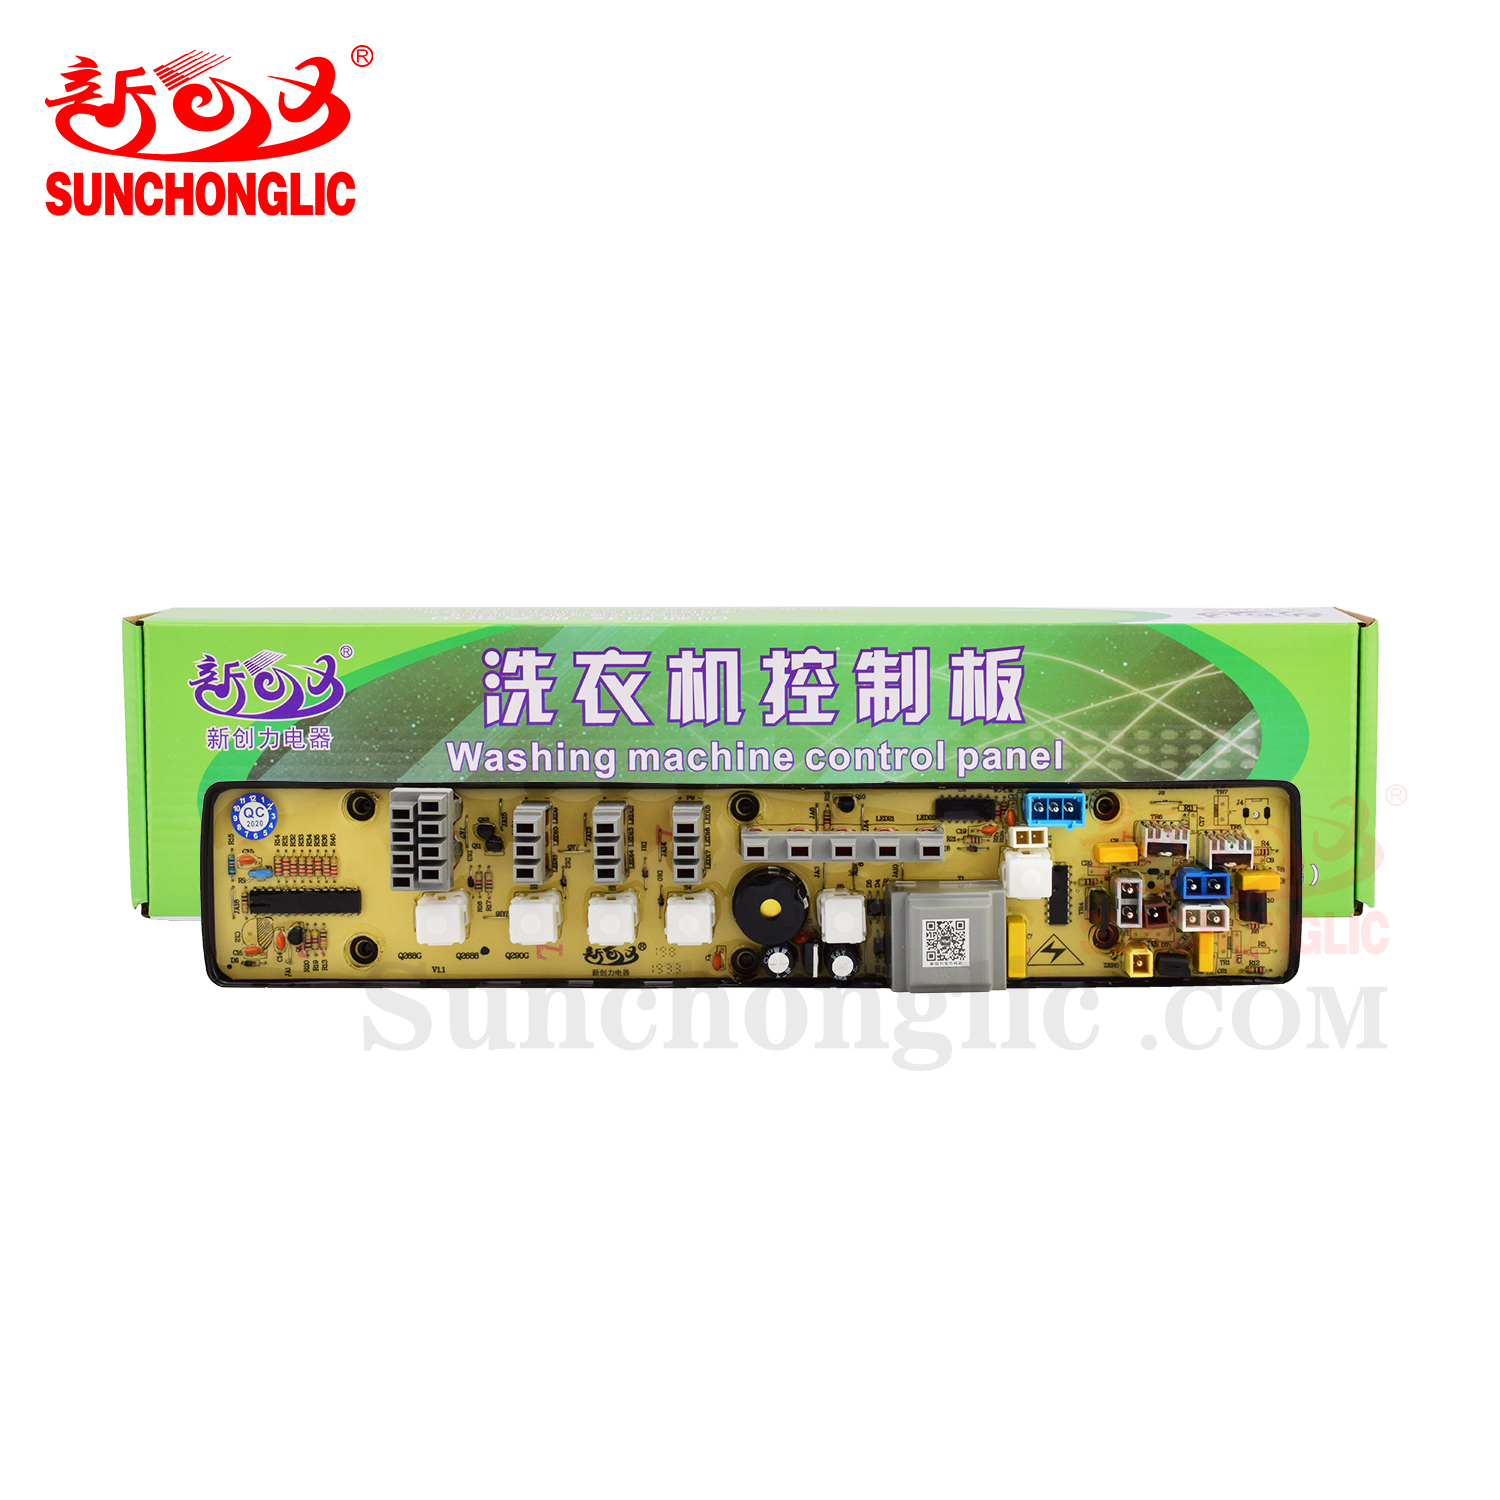 Sunchonglic factory direct sales computer board washing machine control PCB board for Little Swan brand